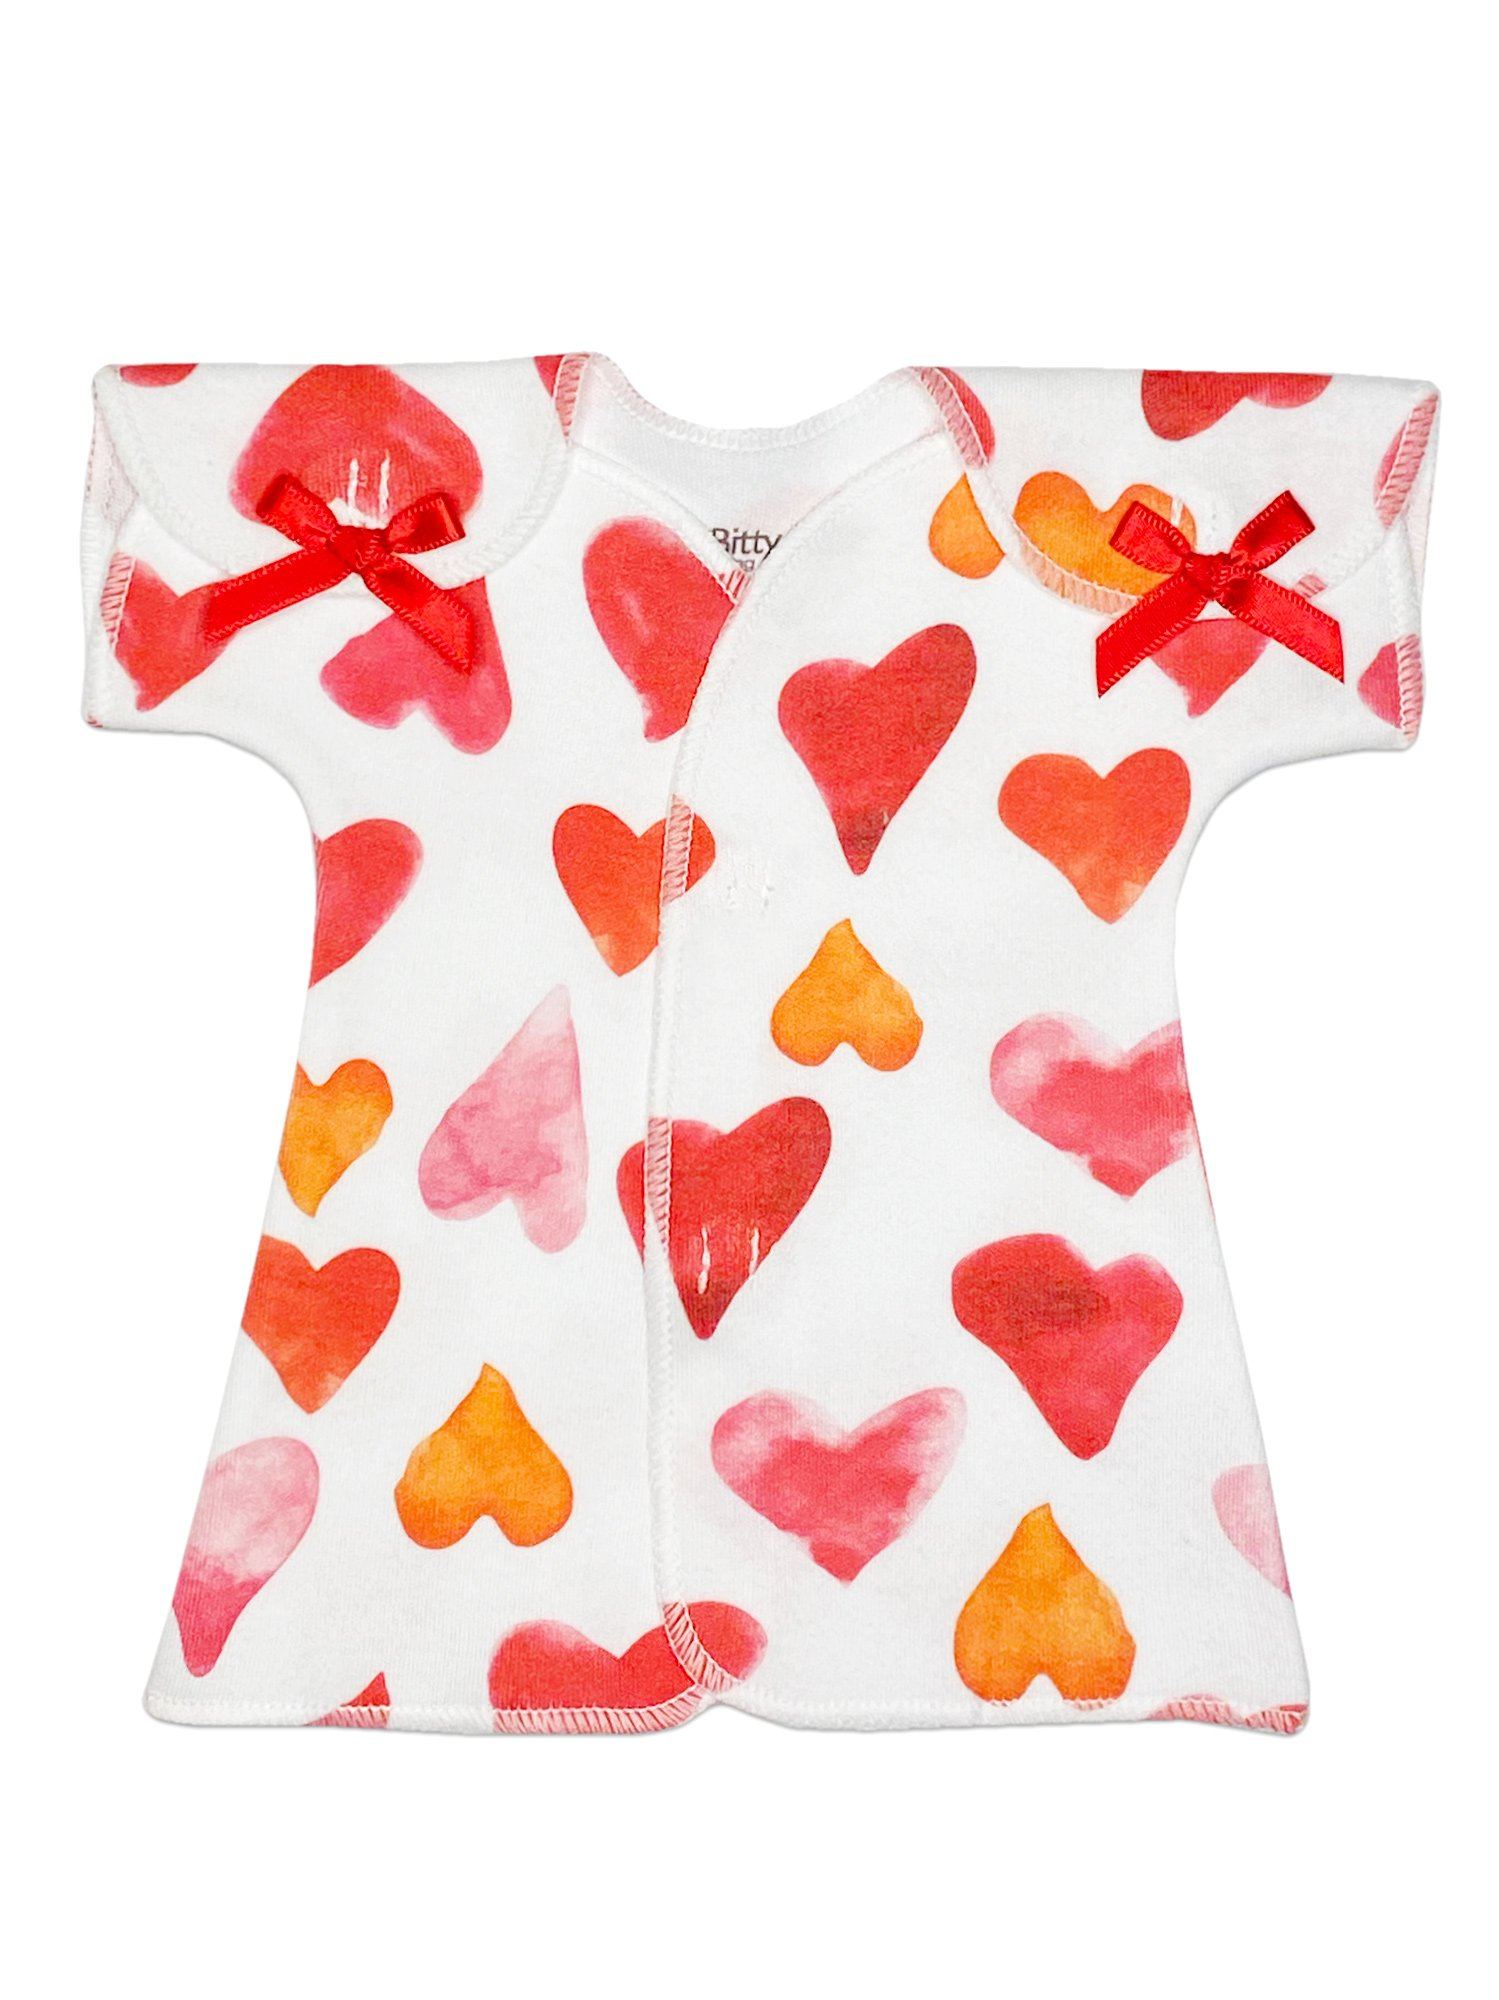 Red Heart Premature Baby Dress (1-3lbs & 3-5lbs) - Dress - Itty Bitty Baby Clothing